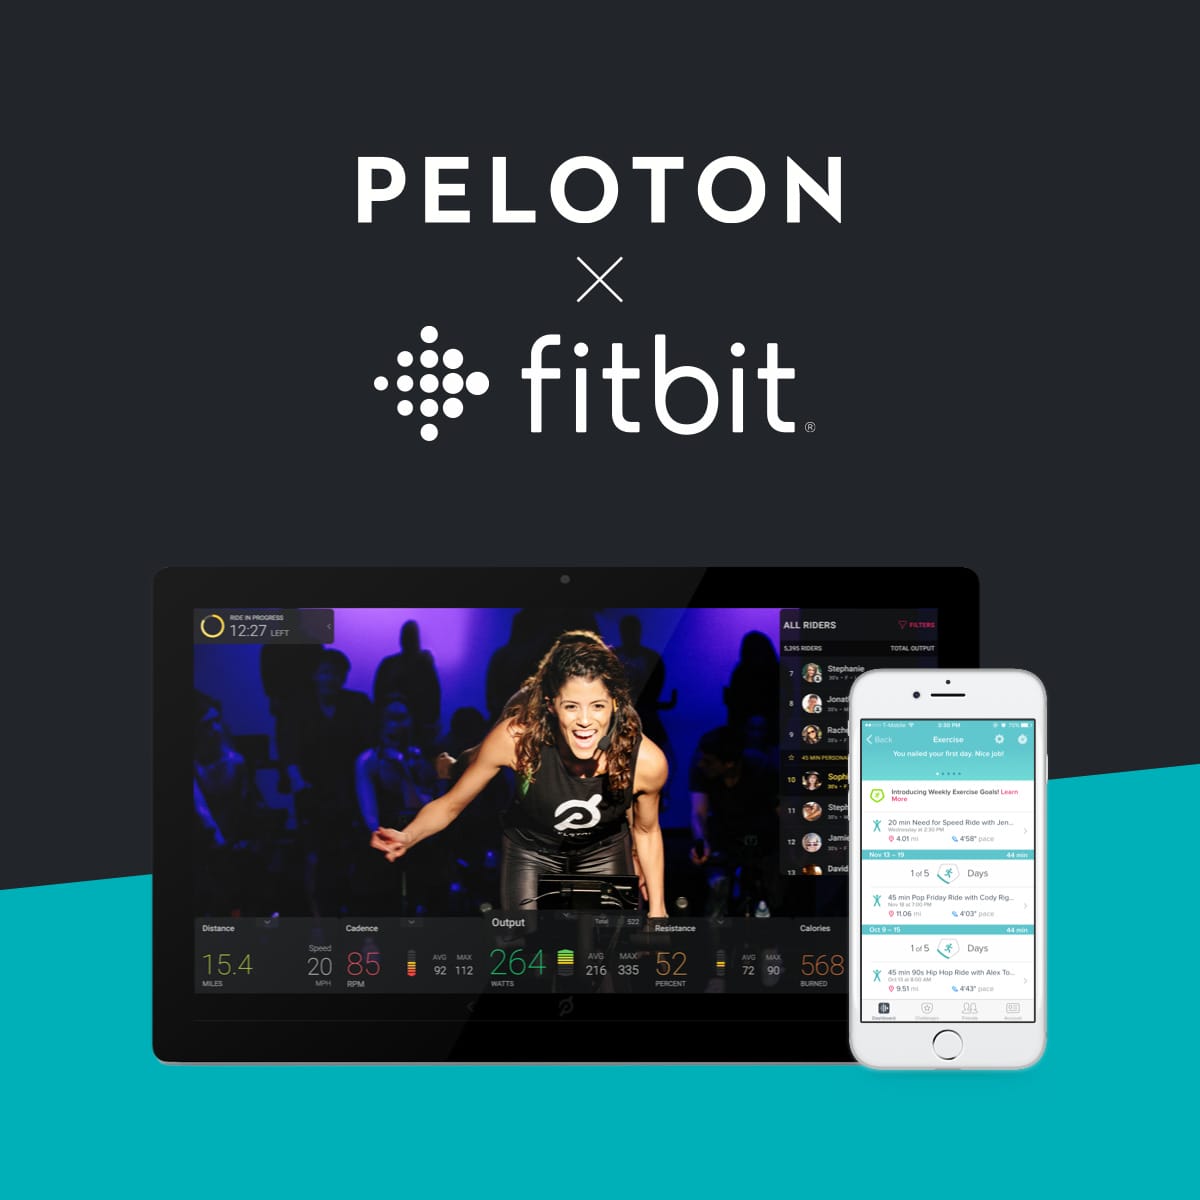 Does peloton connect to Fitbit?